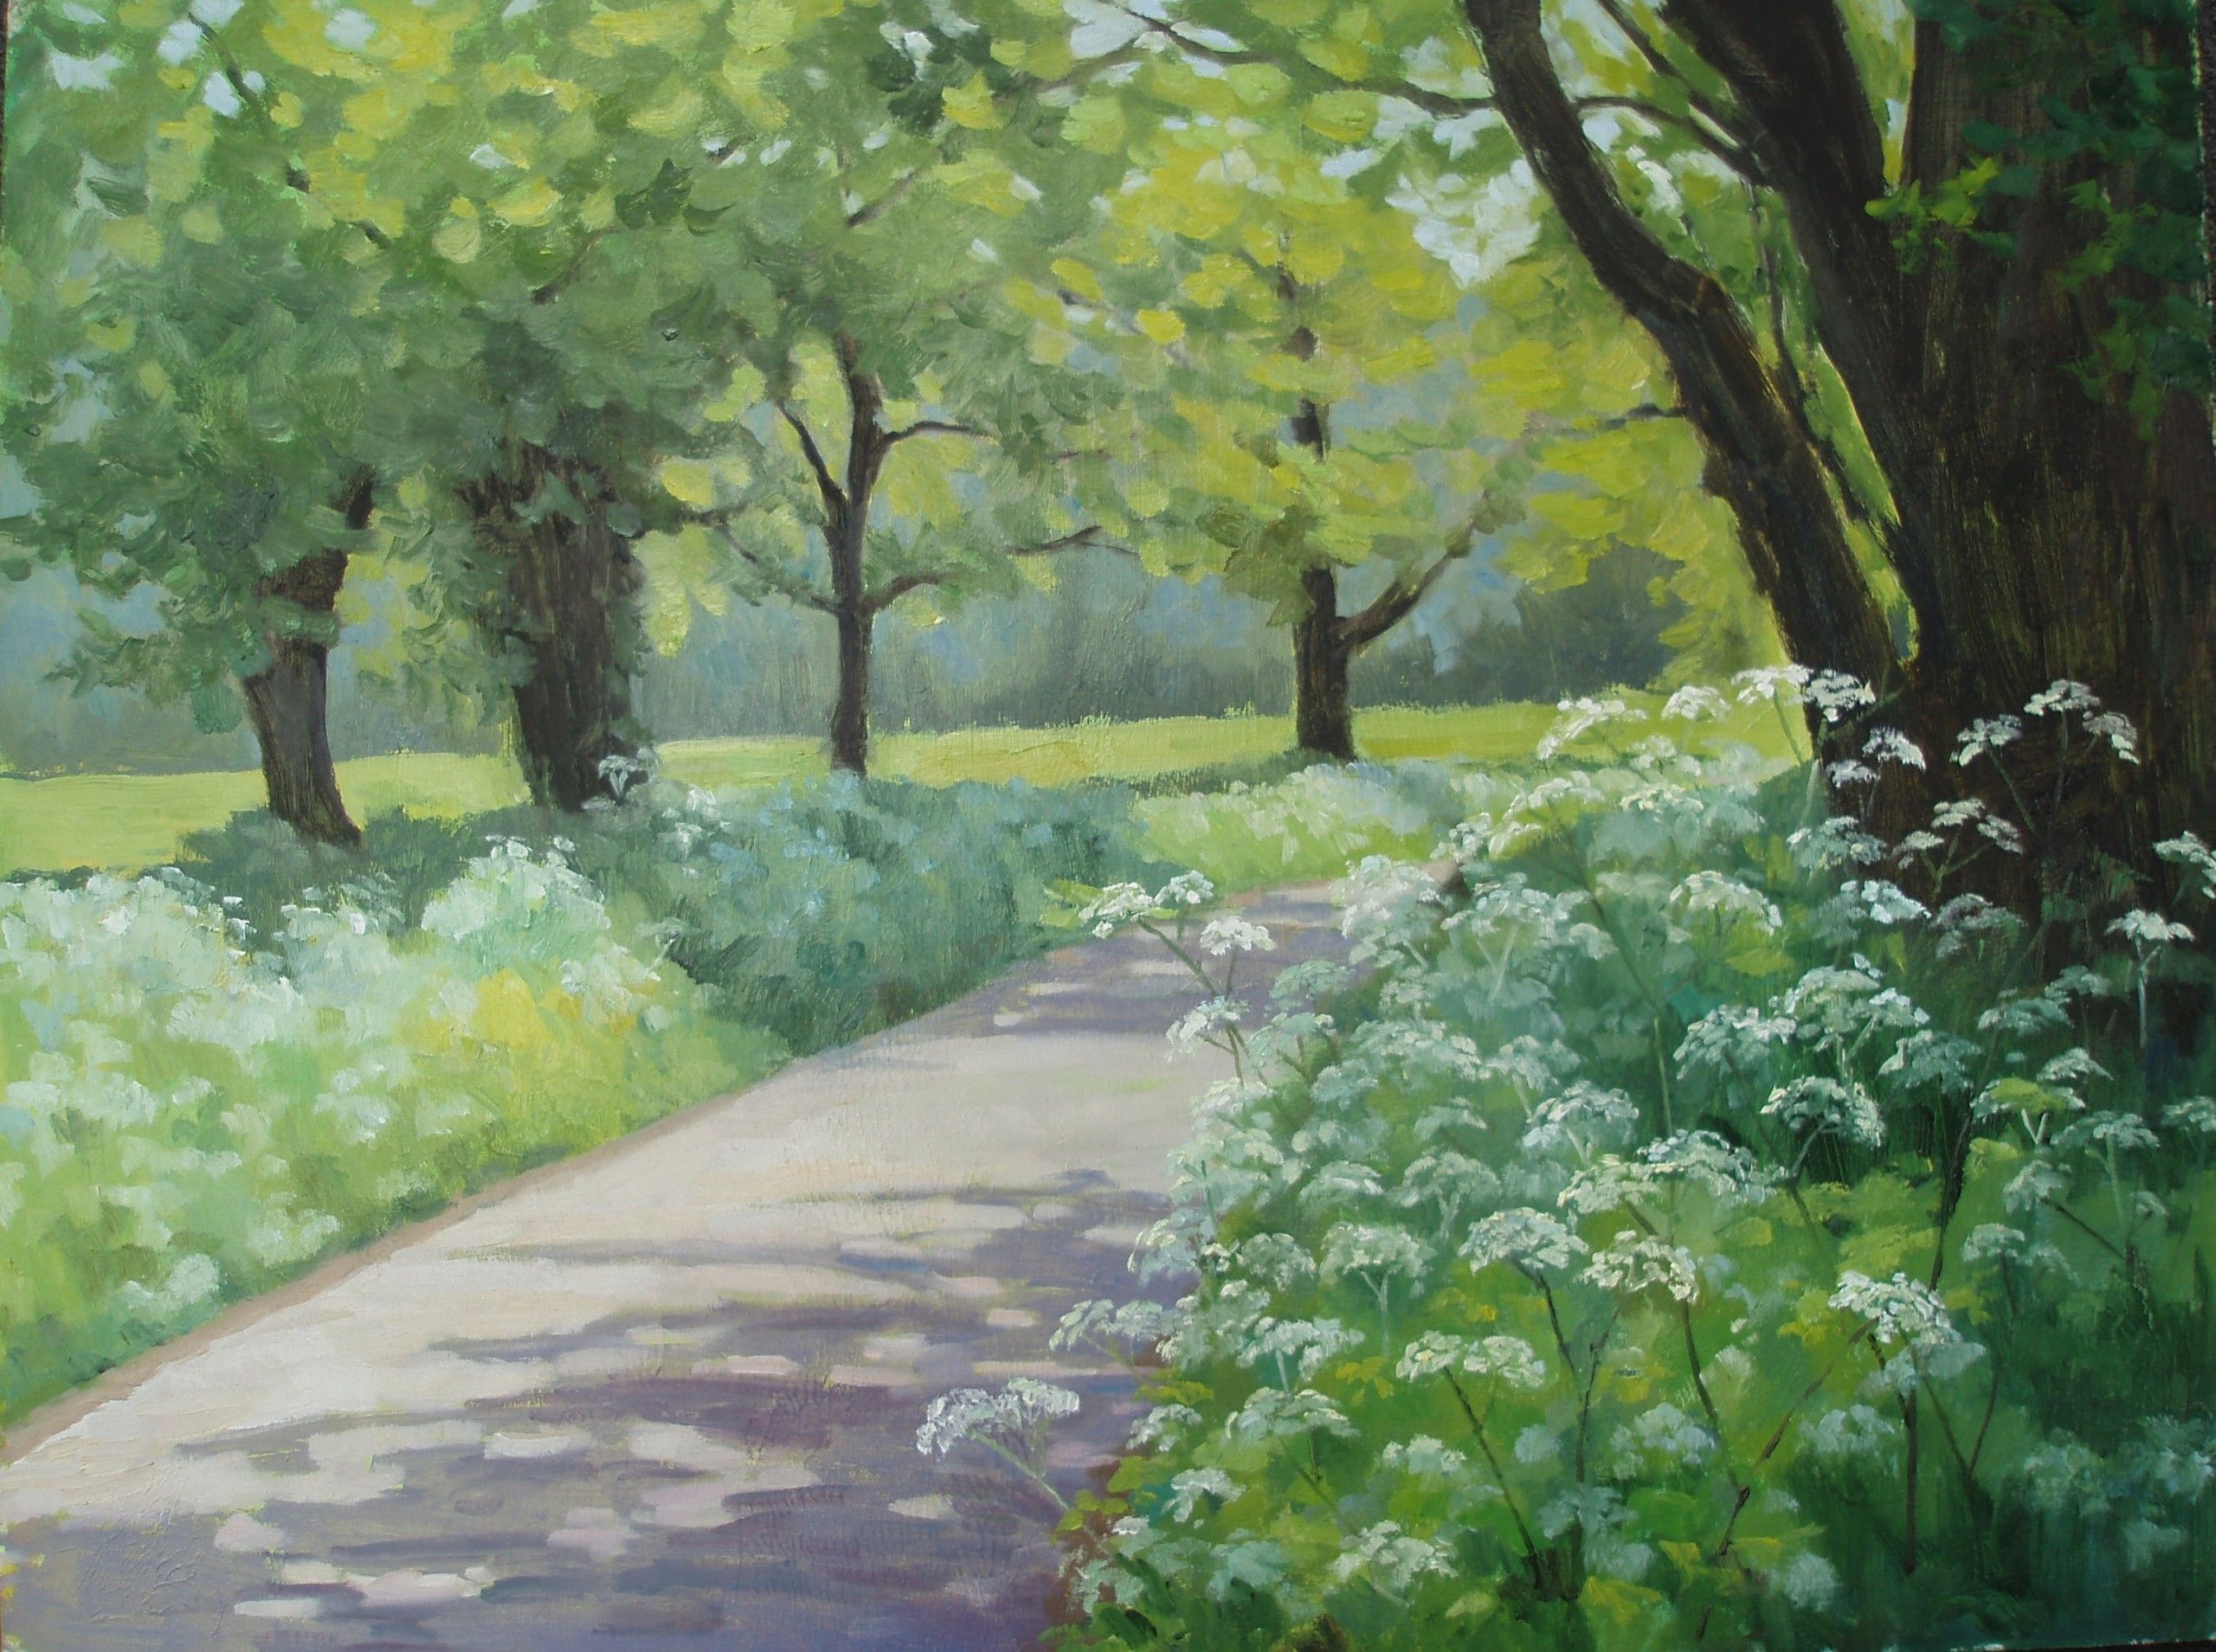 Spring Landscape near Broughton by Andrea Bates